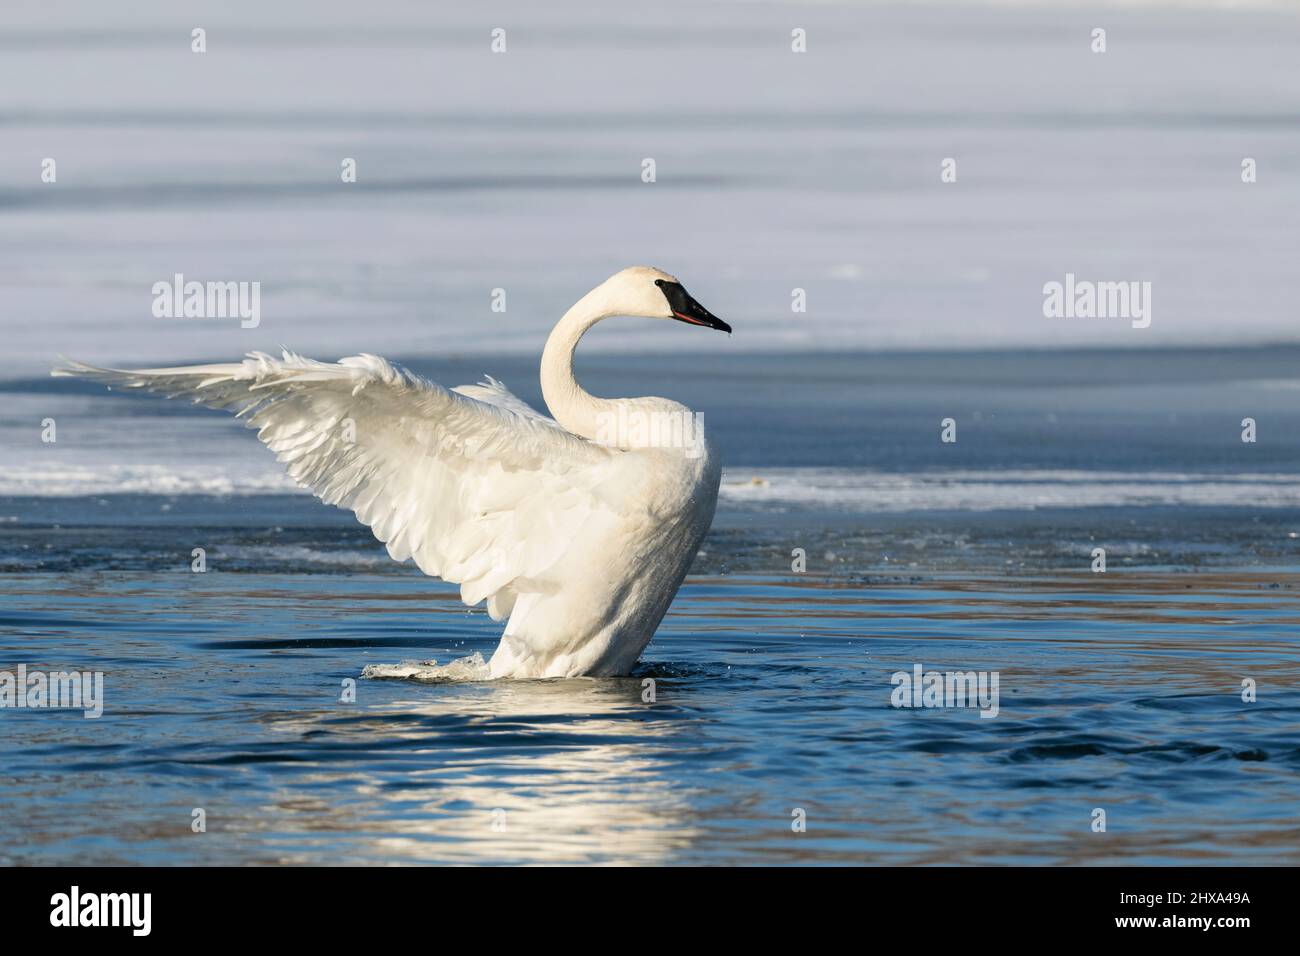 Trumpeter swan (Cygnus buccinator) stretching wings, St Croix river, Winter, WI, USA, by Dominique Braud/Dembinsky Photo Assoc Stock Photo